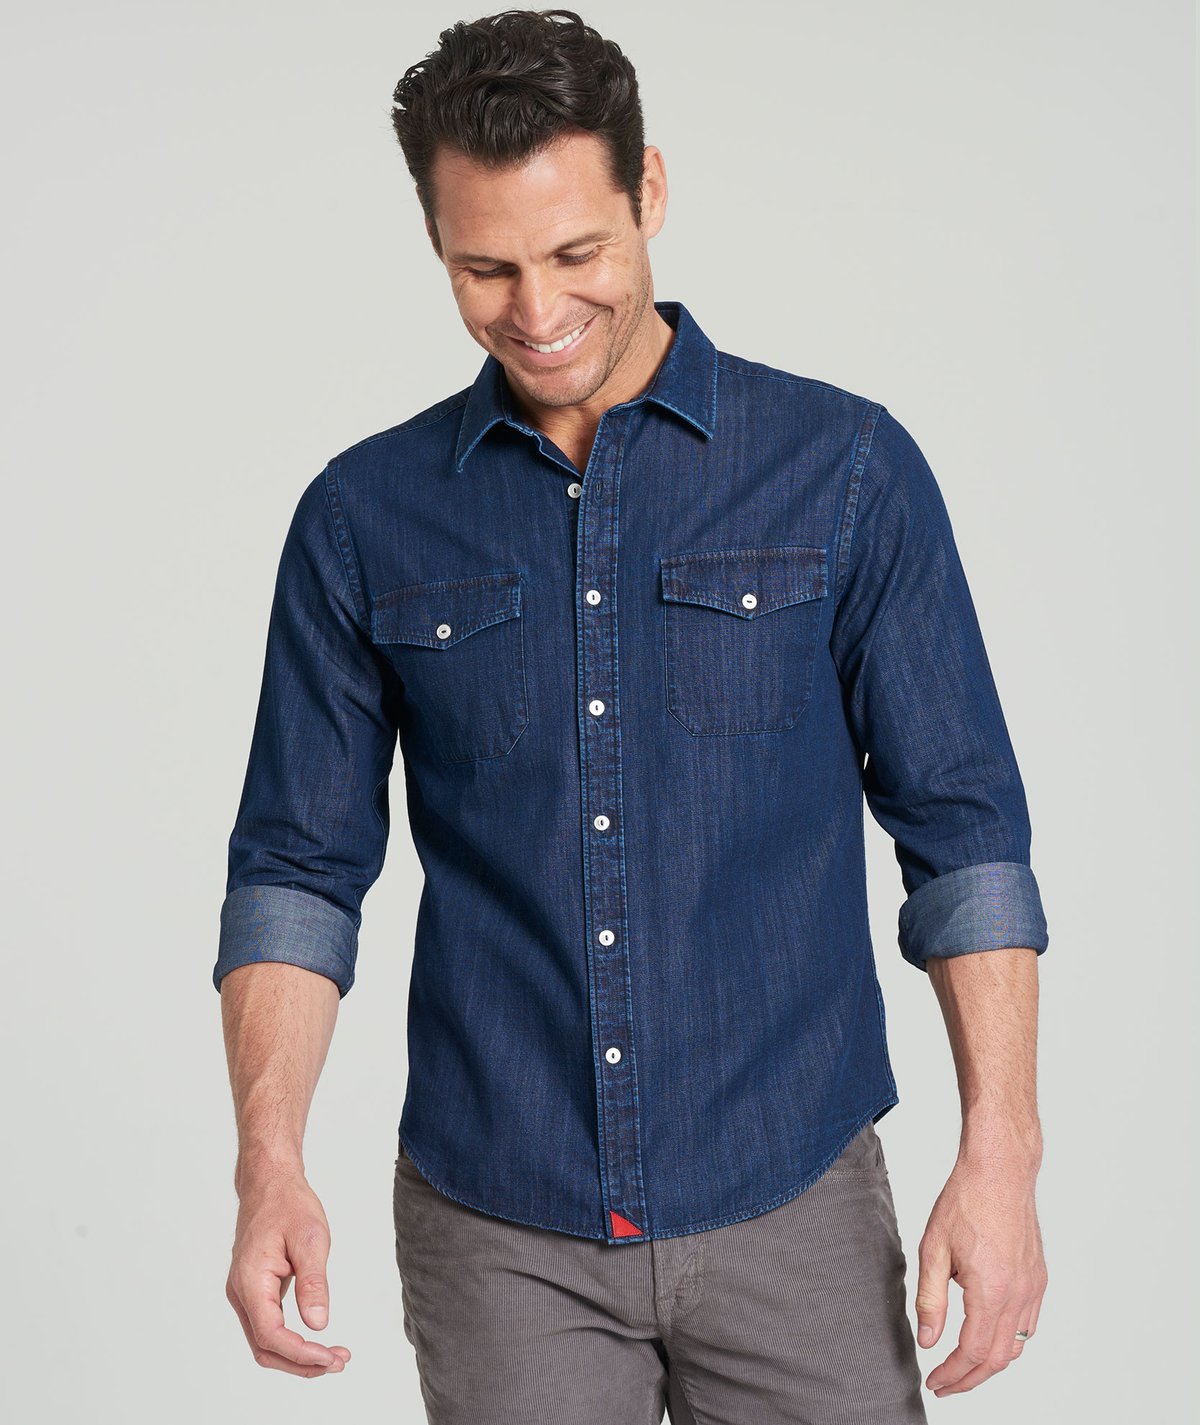 Best Concealed Carry Shirts